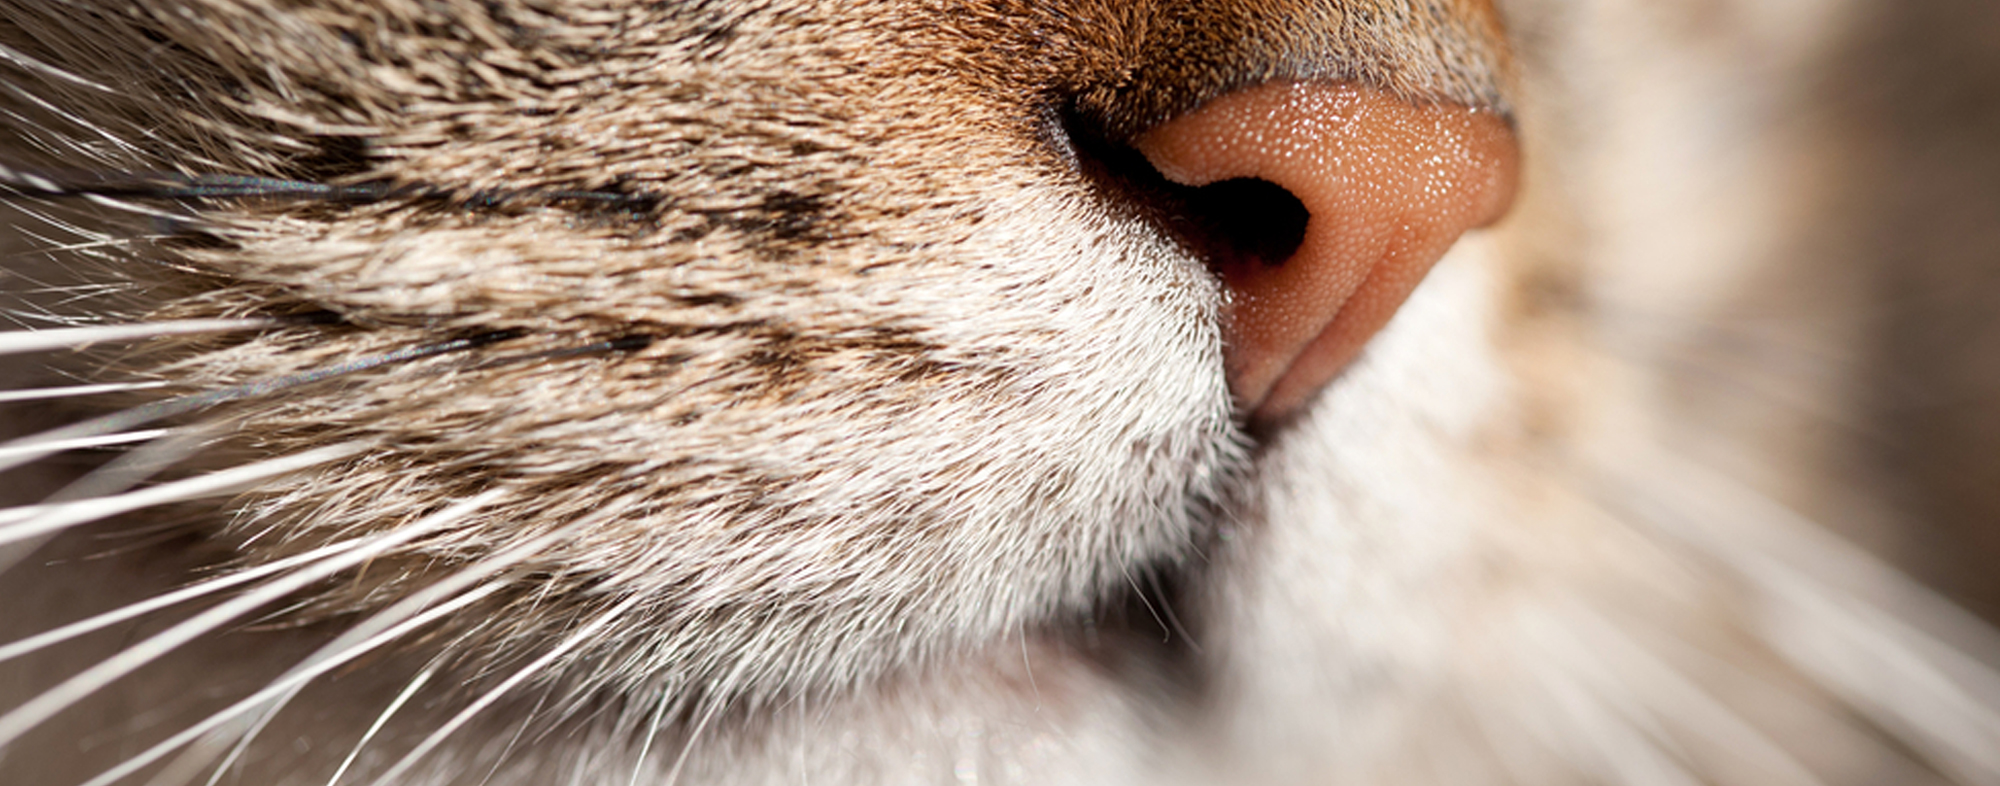 Indicative of your cat's mood, flattened whiskers suggest they're calm